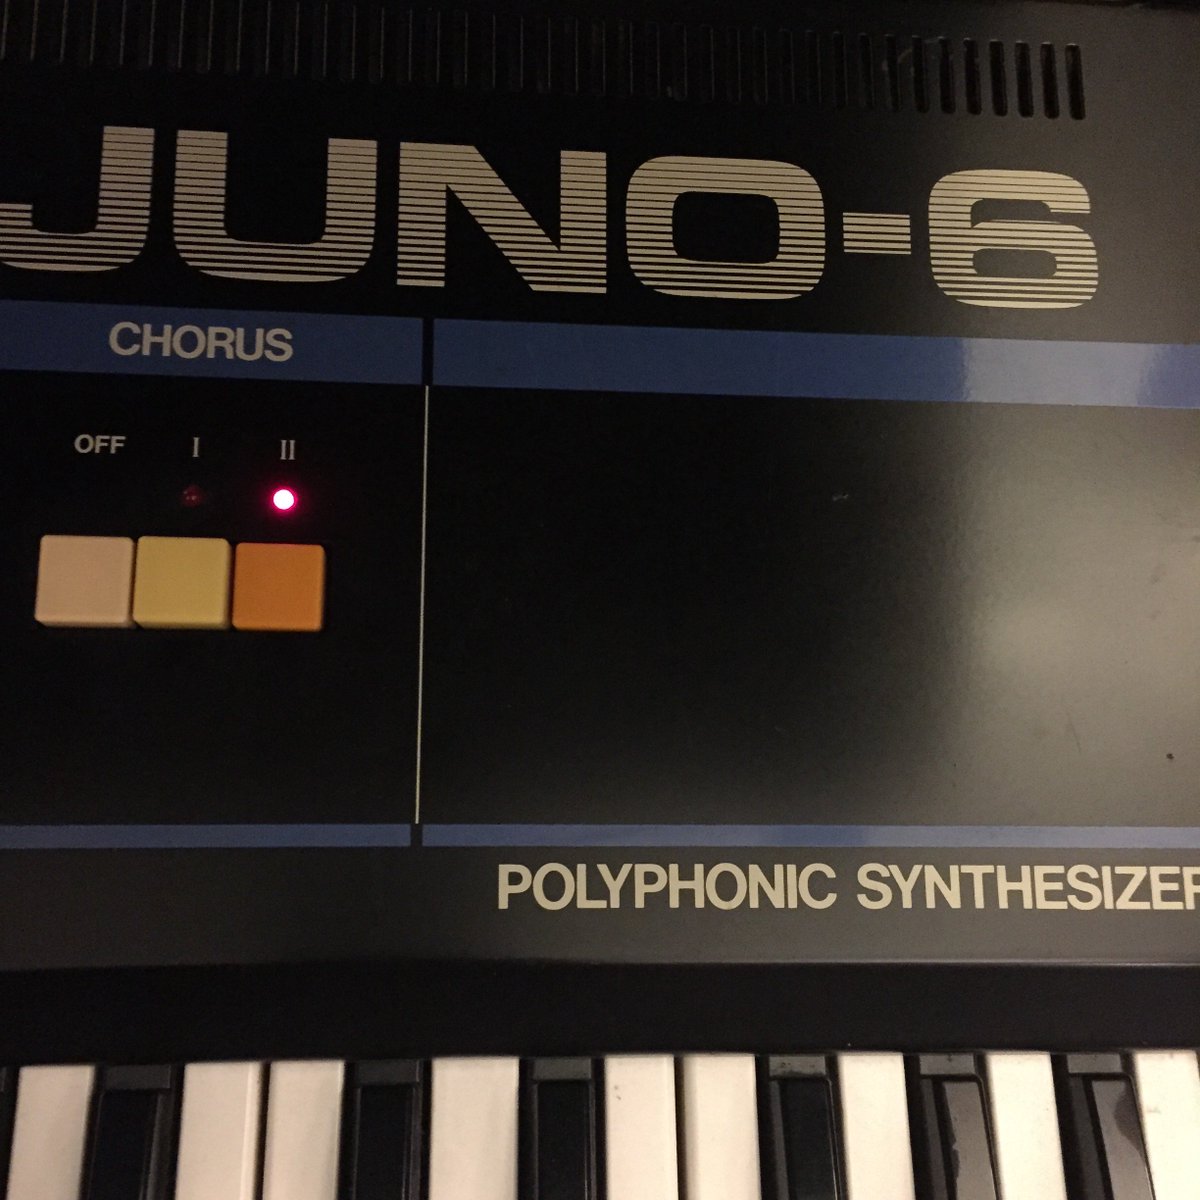 I can't get enough of this synth. And that Chorus... 😍😍😍 You'll hear plenty of this on my upcoming EP! 👽👽👽
#roland #rolandjuno #juno #juno6 #polyphonic #synth #synthesiser #synthesizer #music #musicproduction #musicproducer #producer